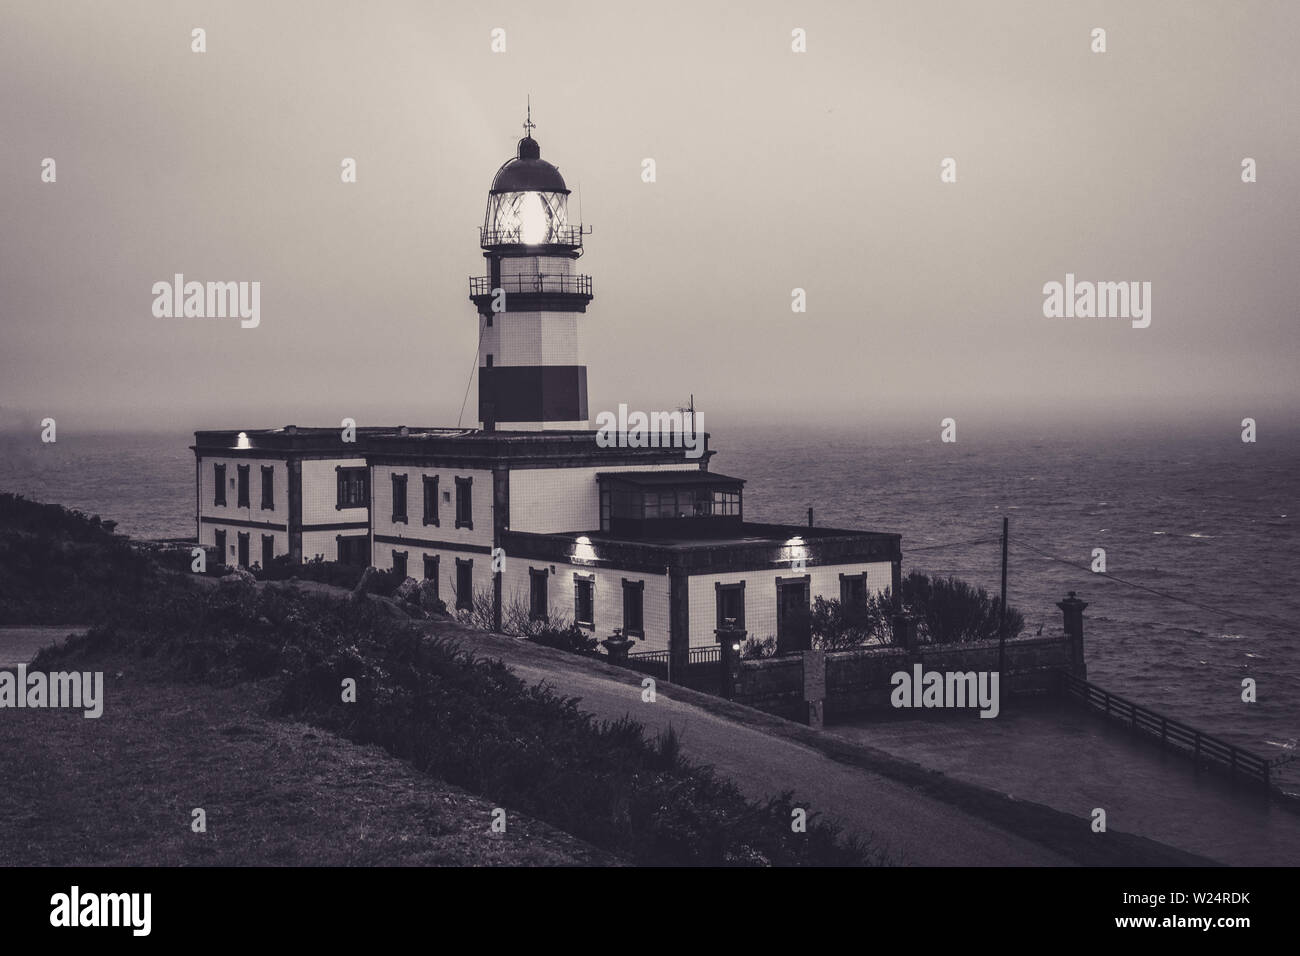 Cape Silleiro lighthouse on a stormy day. The lighthouse is located in Baiona province of Pontevedra, Spain Stock Photo